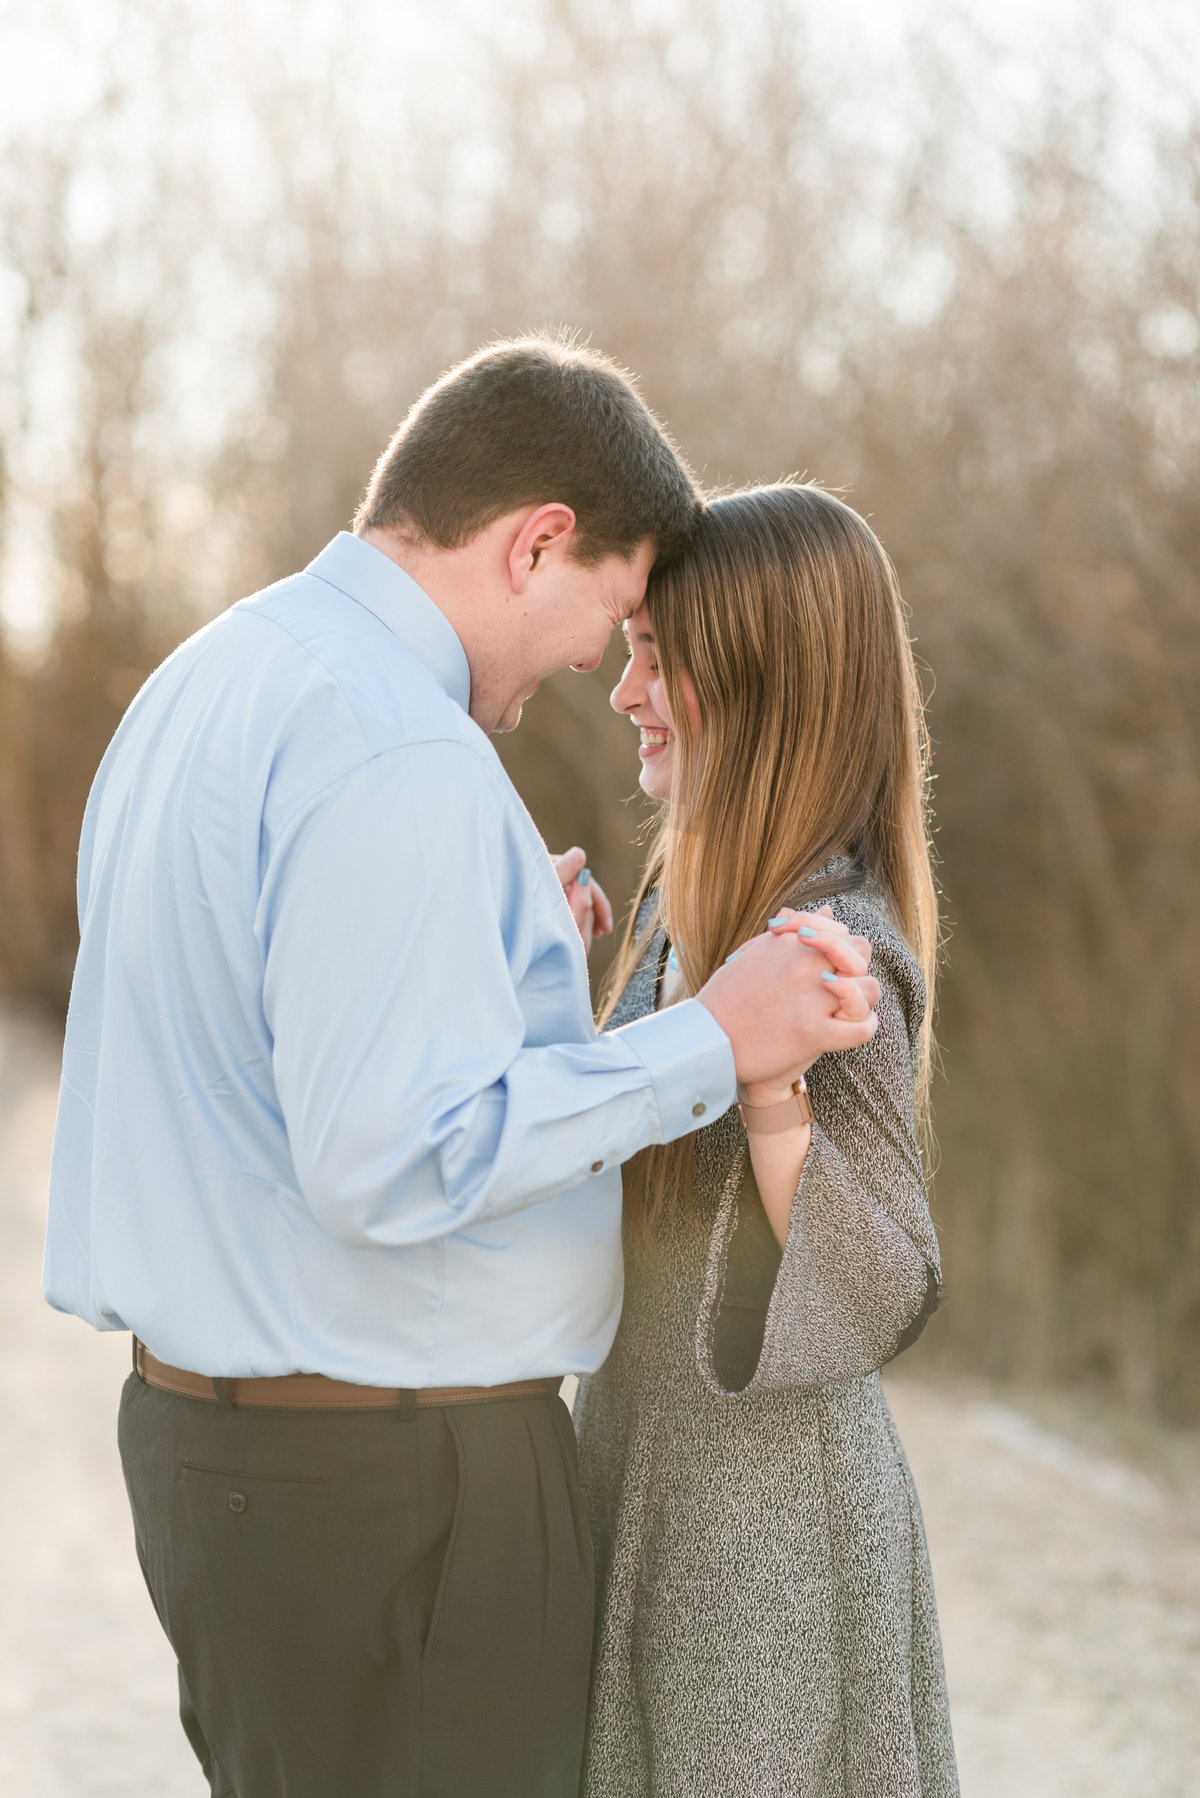 20190302 - Jannae and Forest Engagement Session 005 - A Winter Reid Merrill Park Engagement Session